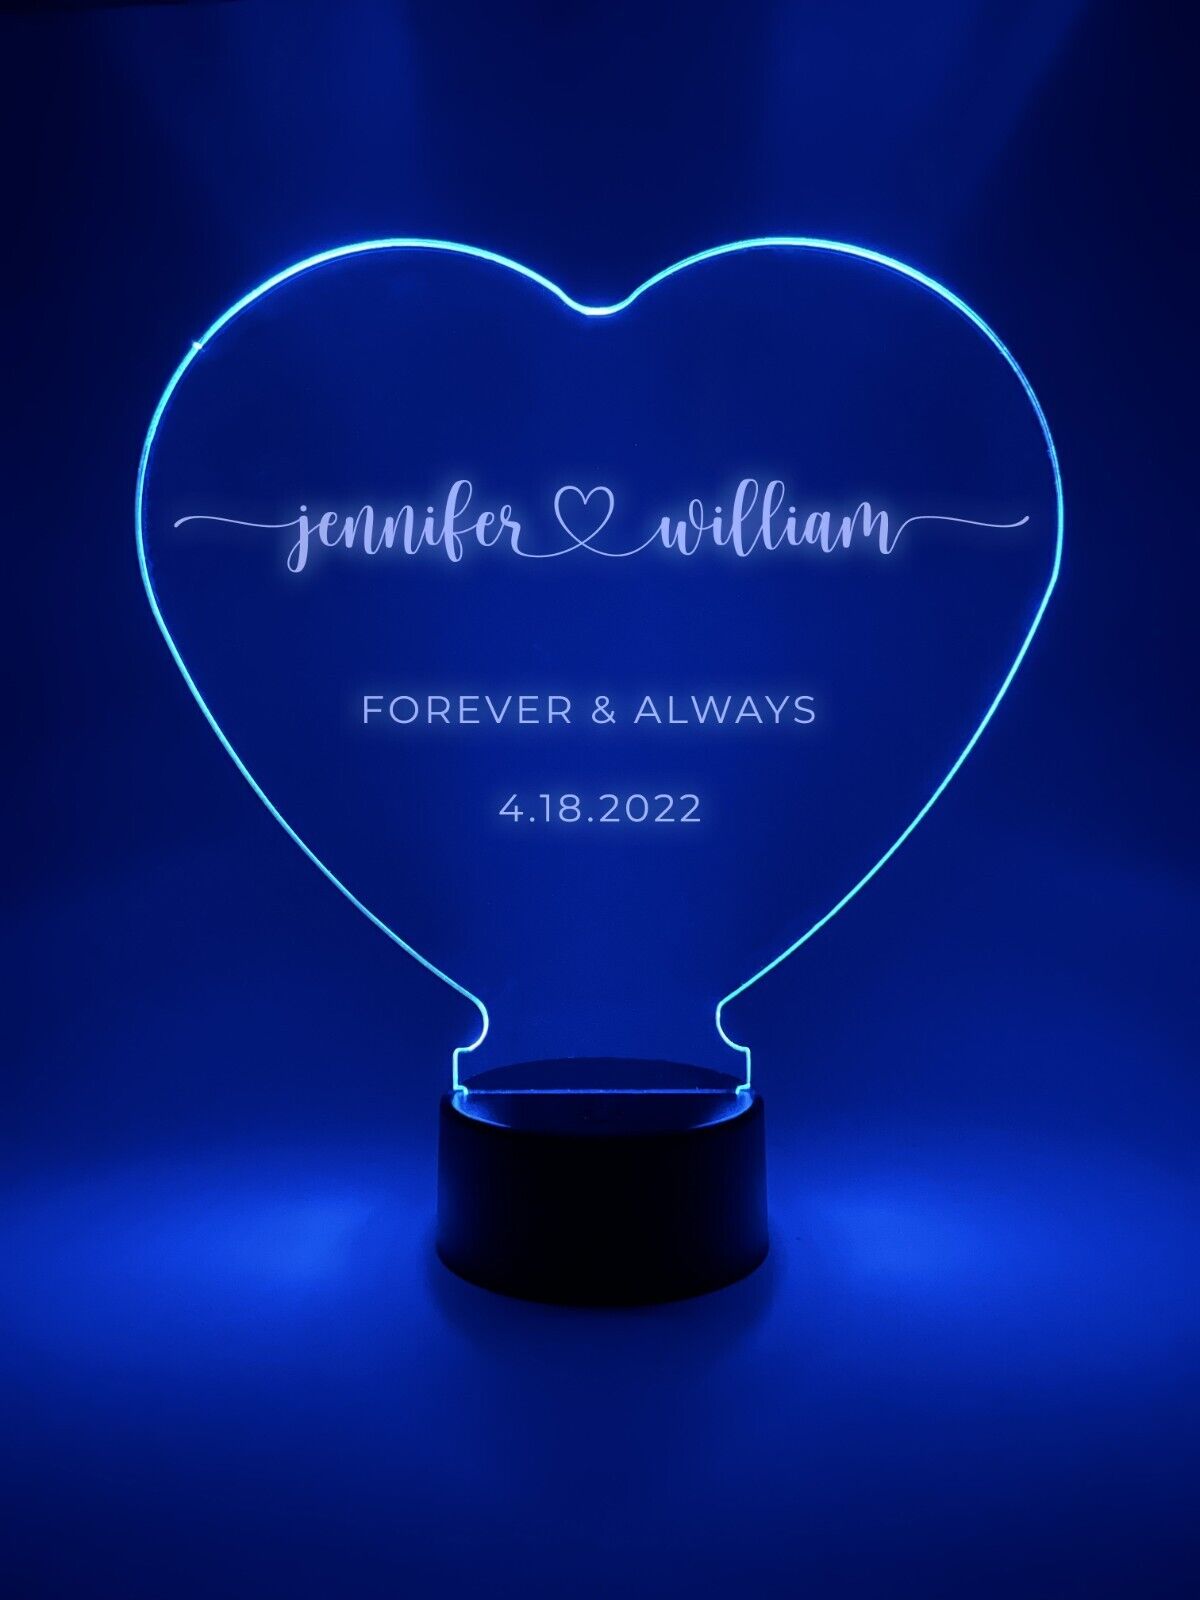 Personalized Couple Love Heart Night Light Up Table Desk Lamp LED 16 color light